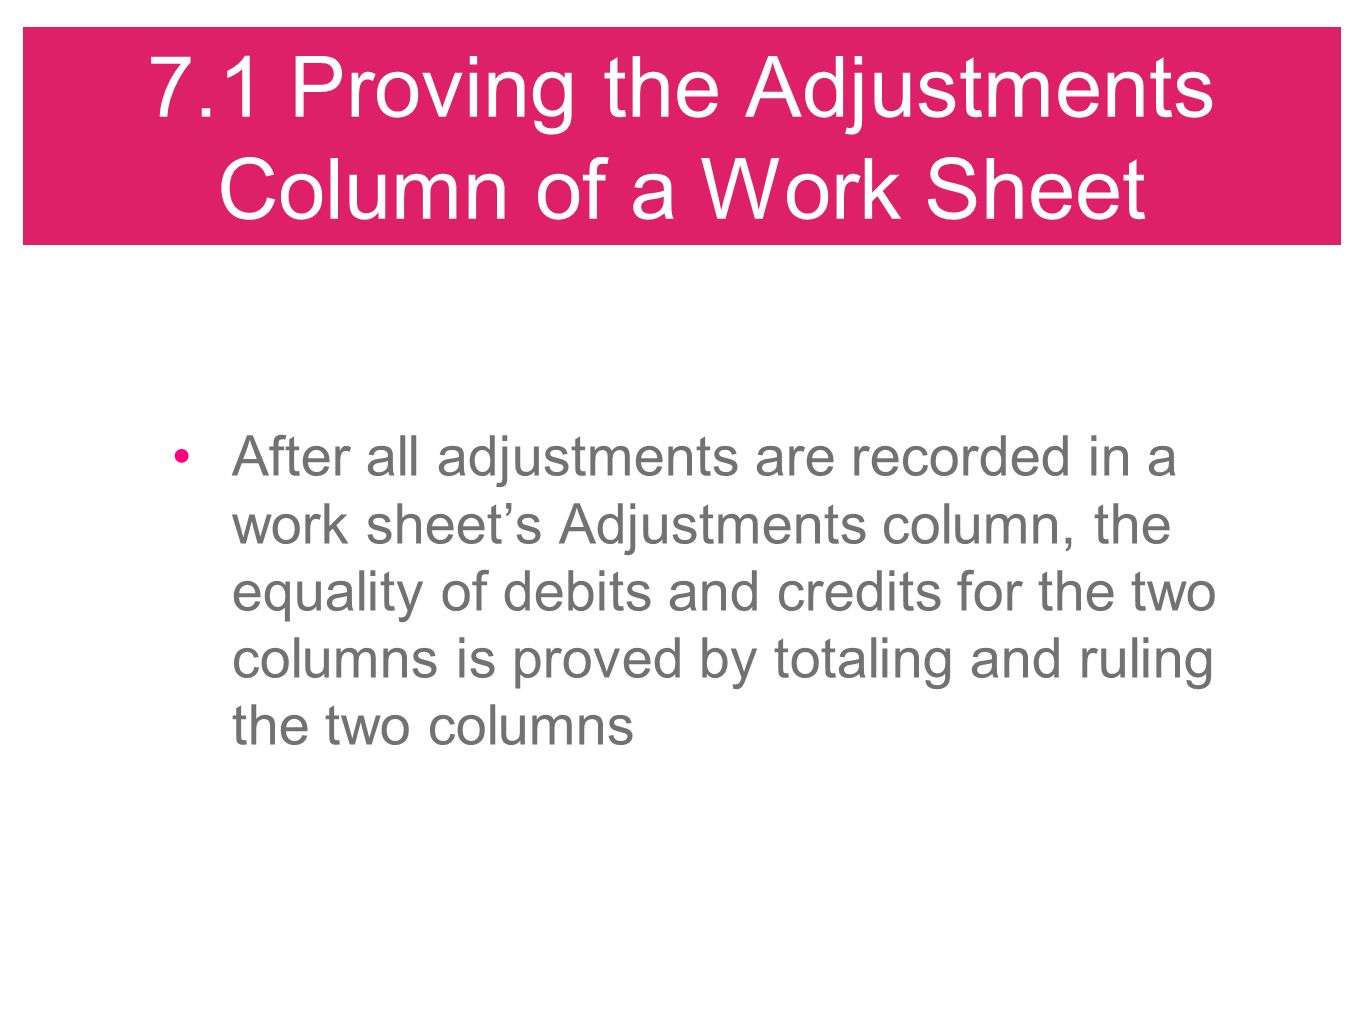 7.1 Proving the Adjustments Column of a Work Sheet